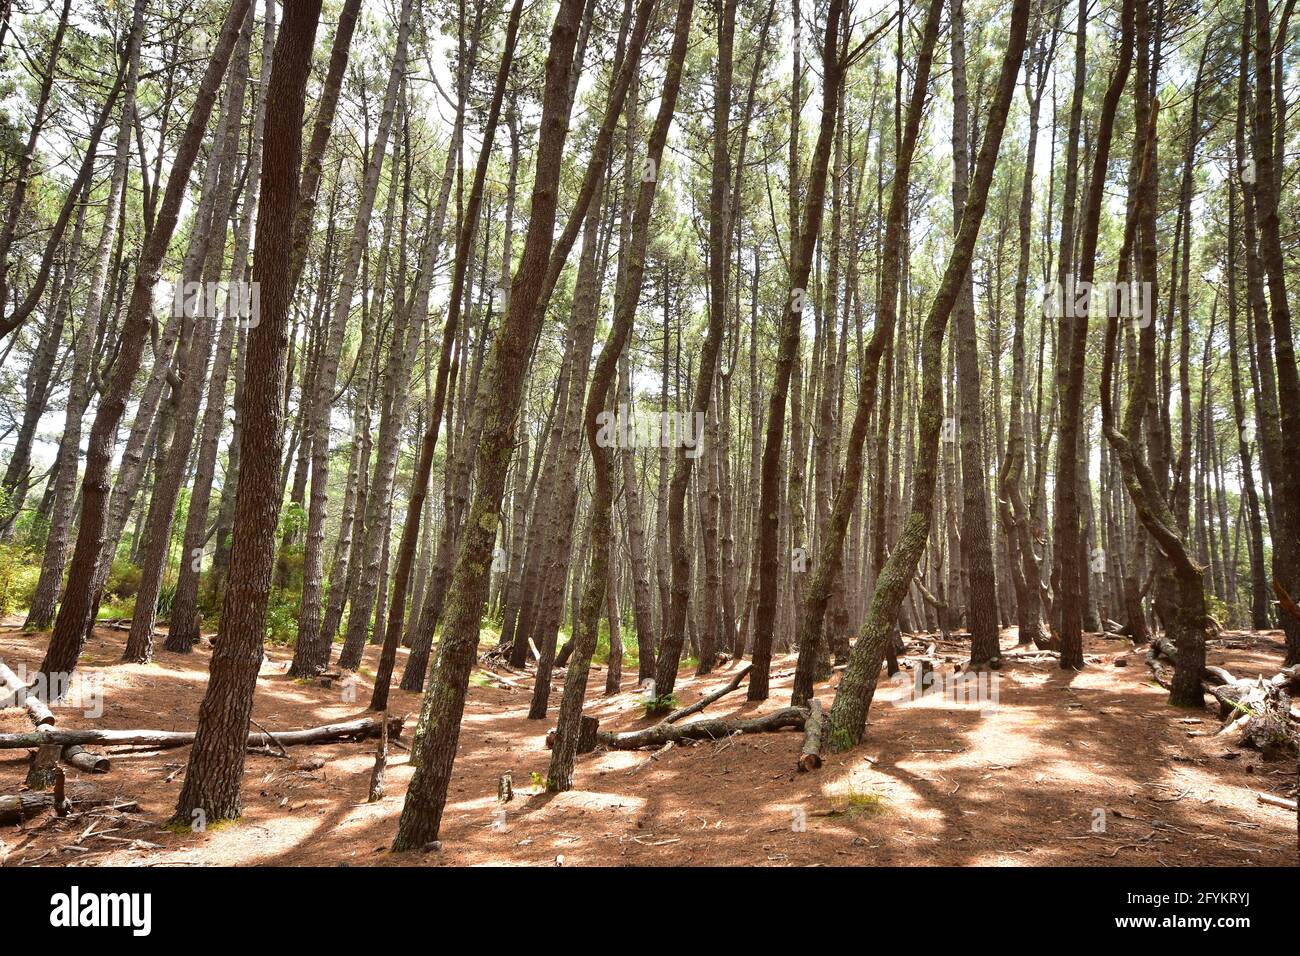 Dense pine forest with tall trunks and no vegetation on forest floor just broken off branches and layer of twigs. Stock Photo